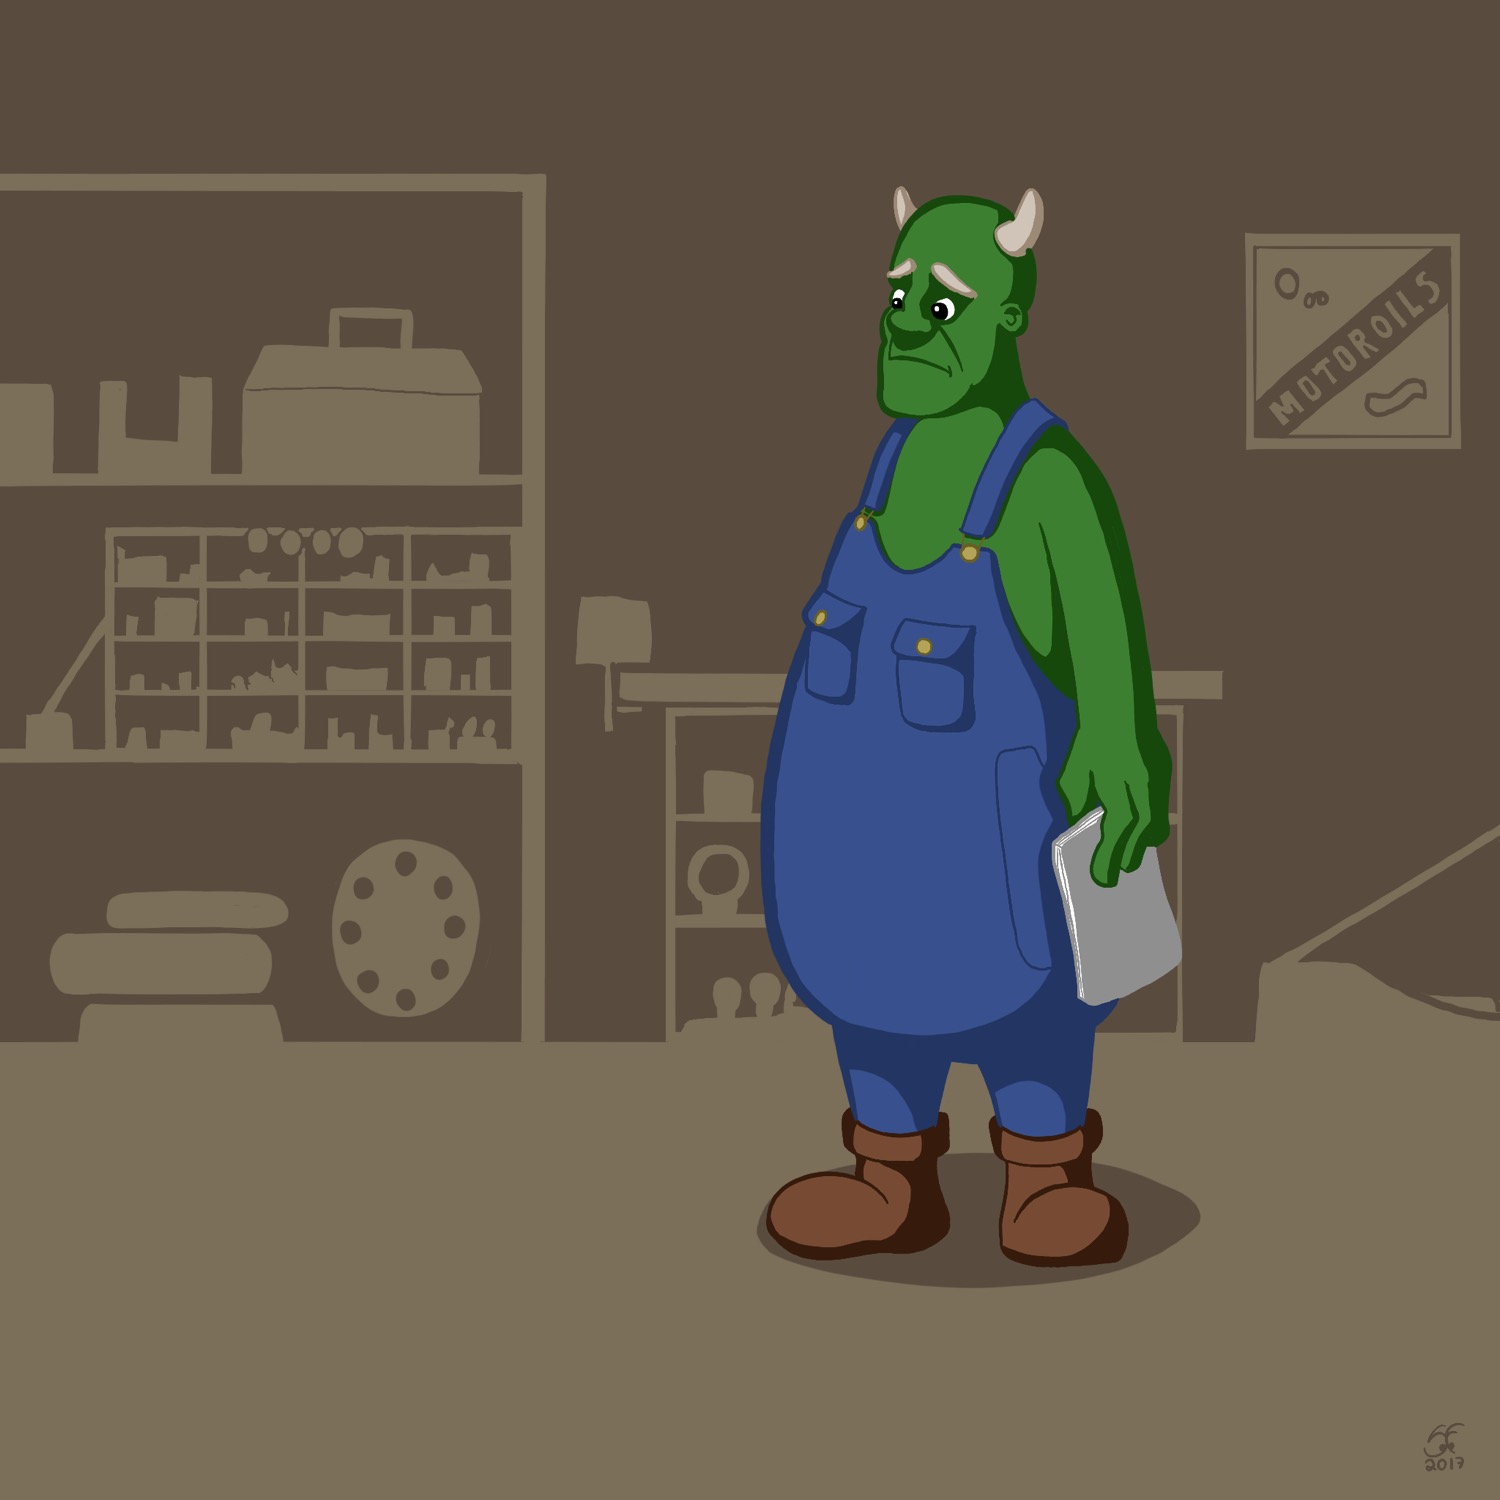 Illustration of a troll in a pair of dungarees standing in a mechanic's workshop